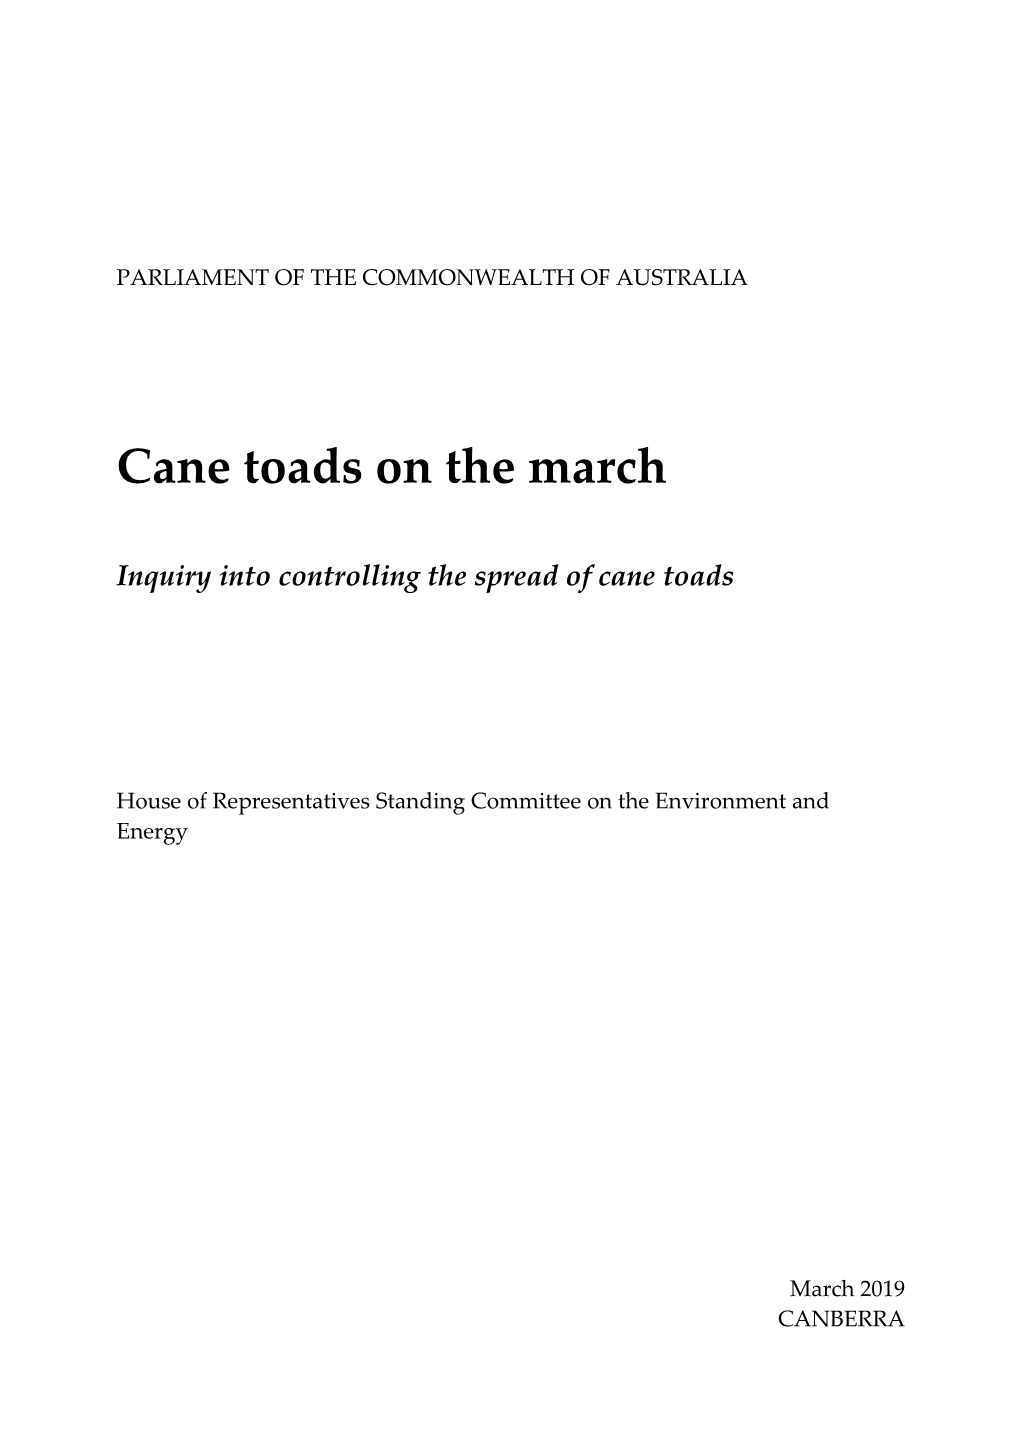 Cane Toads on the March